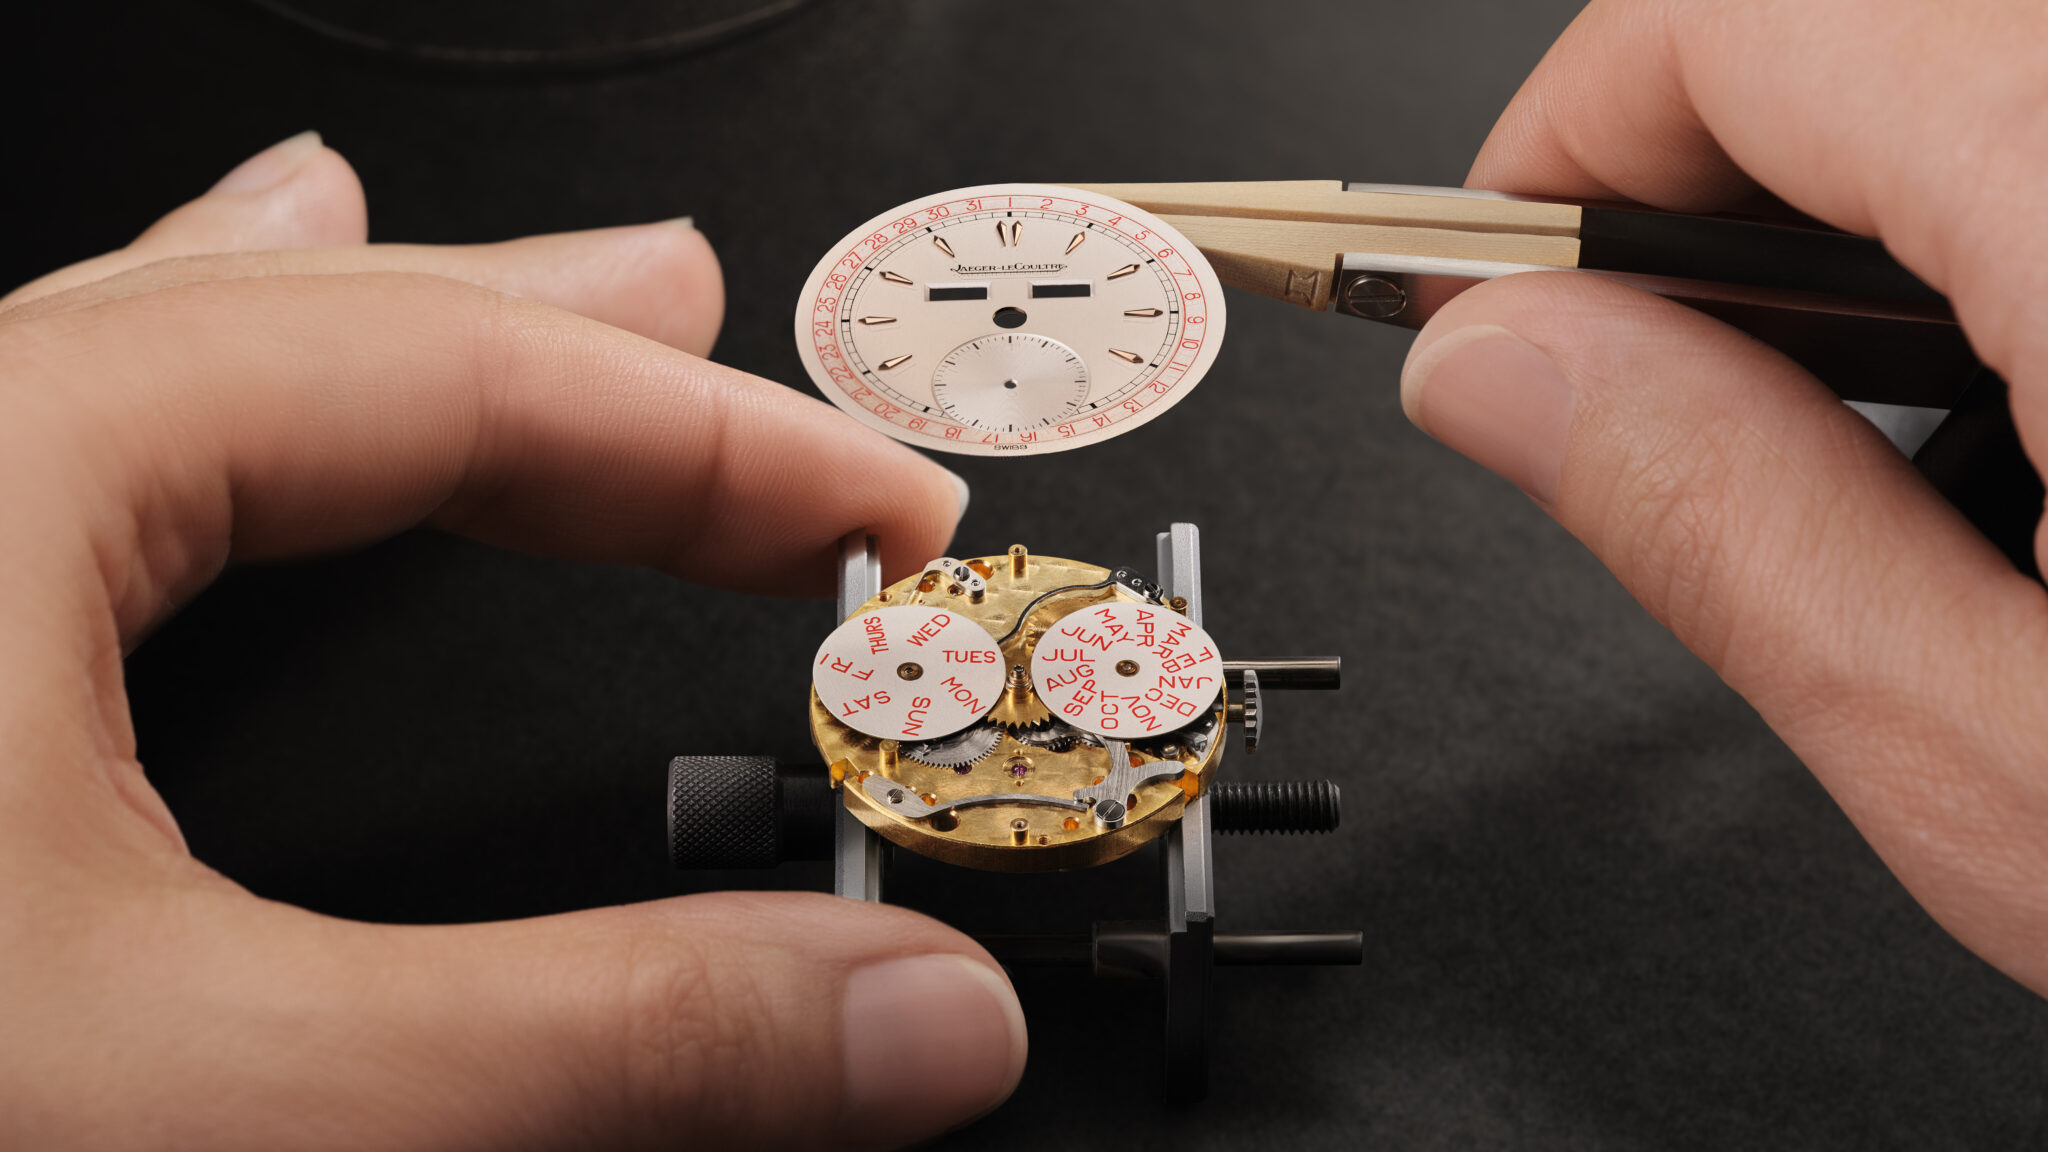 Jaeger-lecoultre jaeger lecoultre inthemaking restoration 16. 91